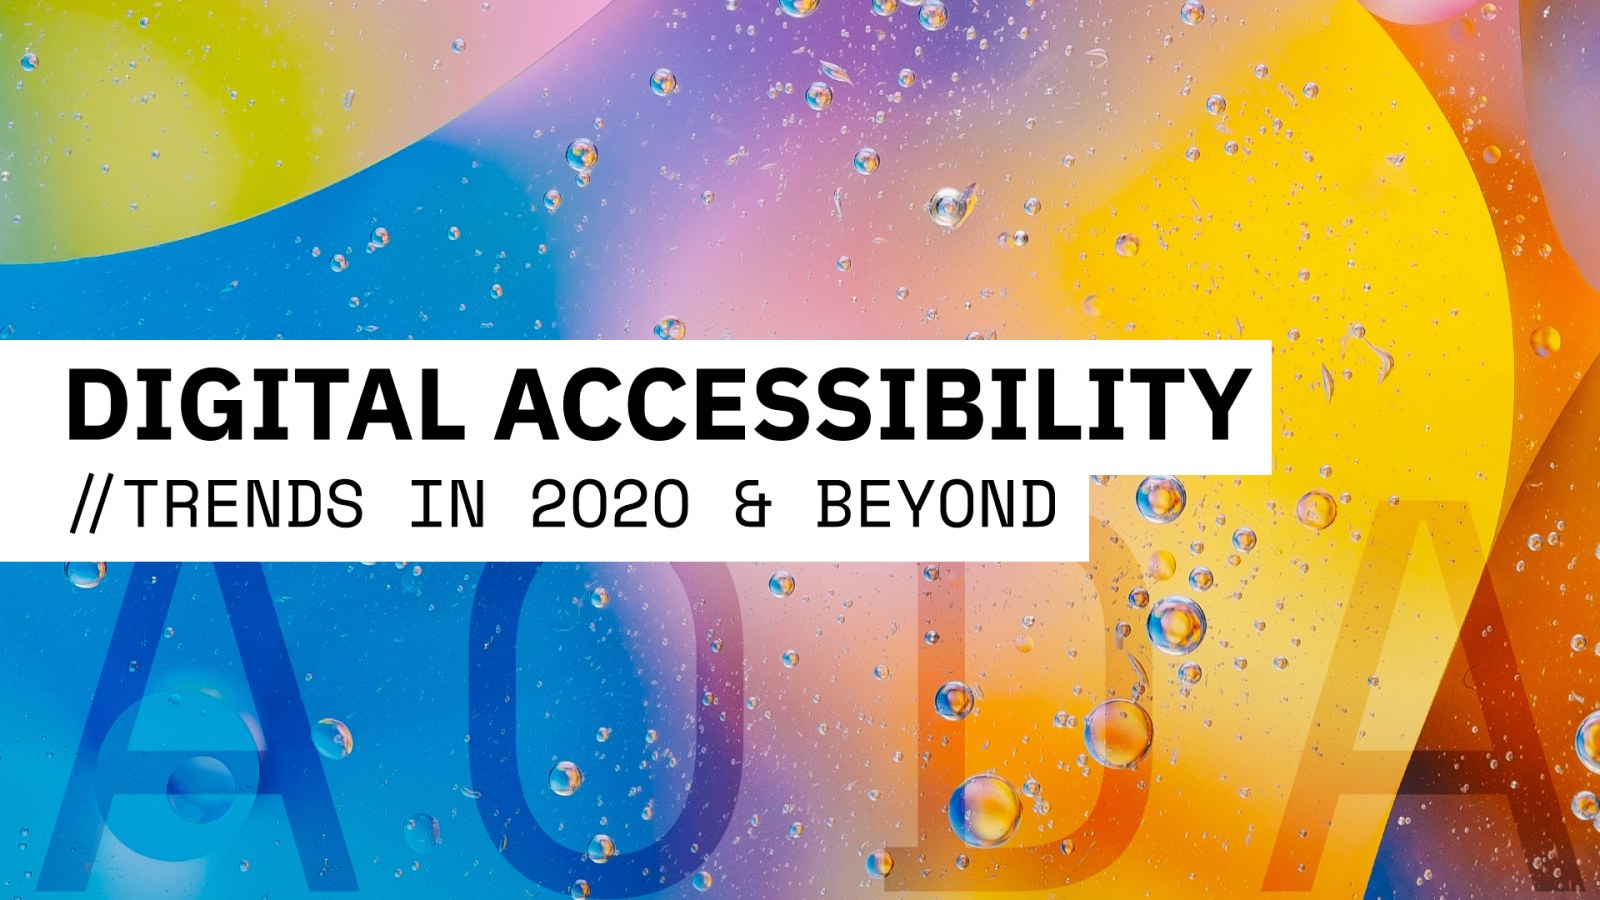 Digital Accessibility Trends in 2020 & Beyond